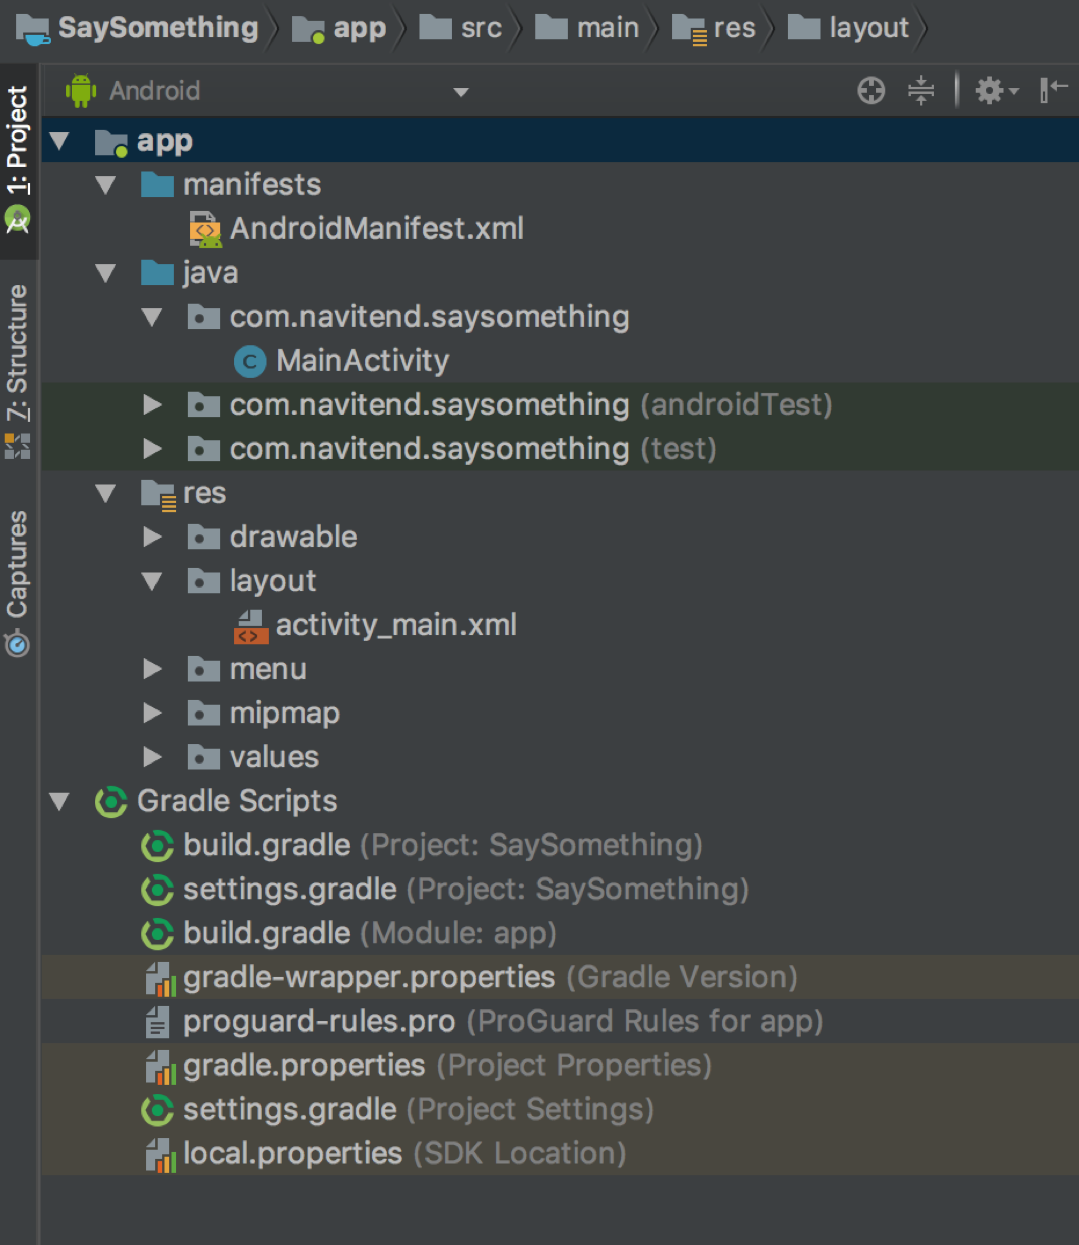 Screen shot of New Project files shown in the Project section of Android Studio